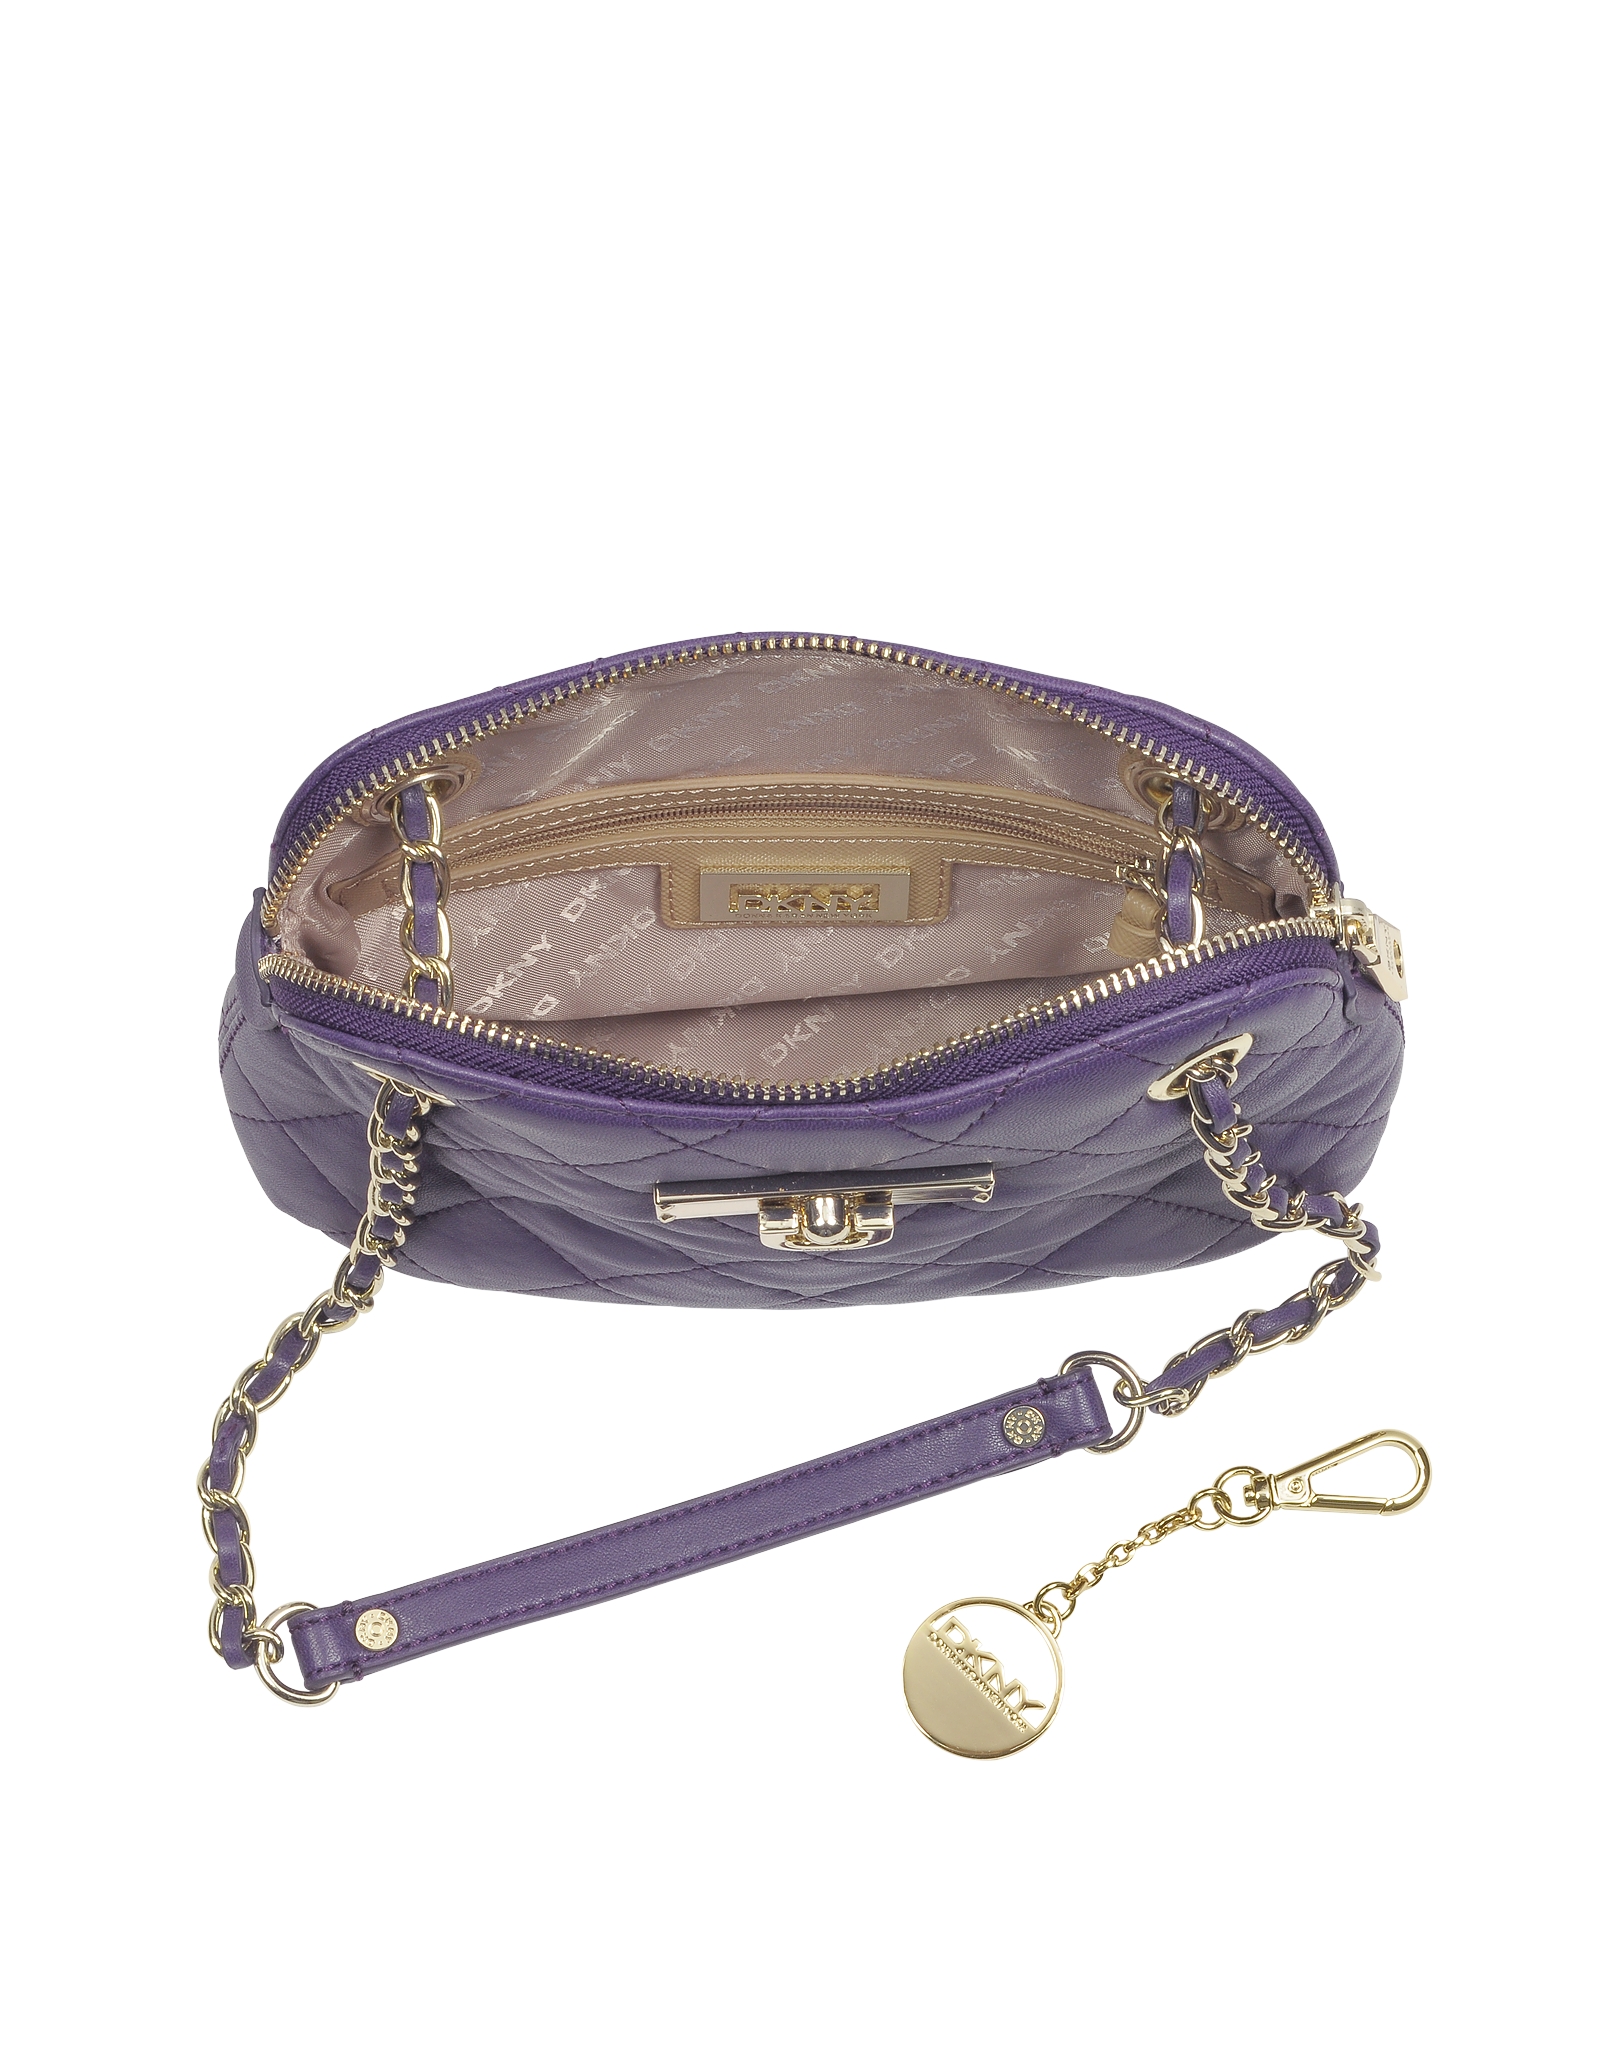 DKNY Small Round Quilted Leather Crossbody Bag in Purple - Lyst